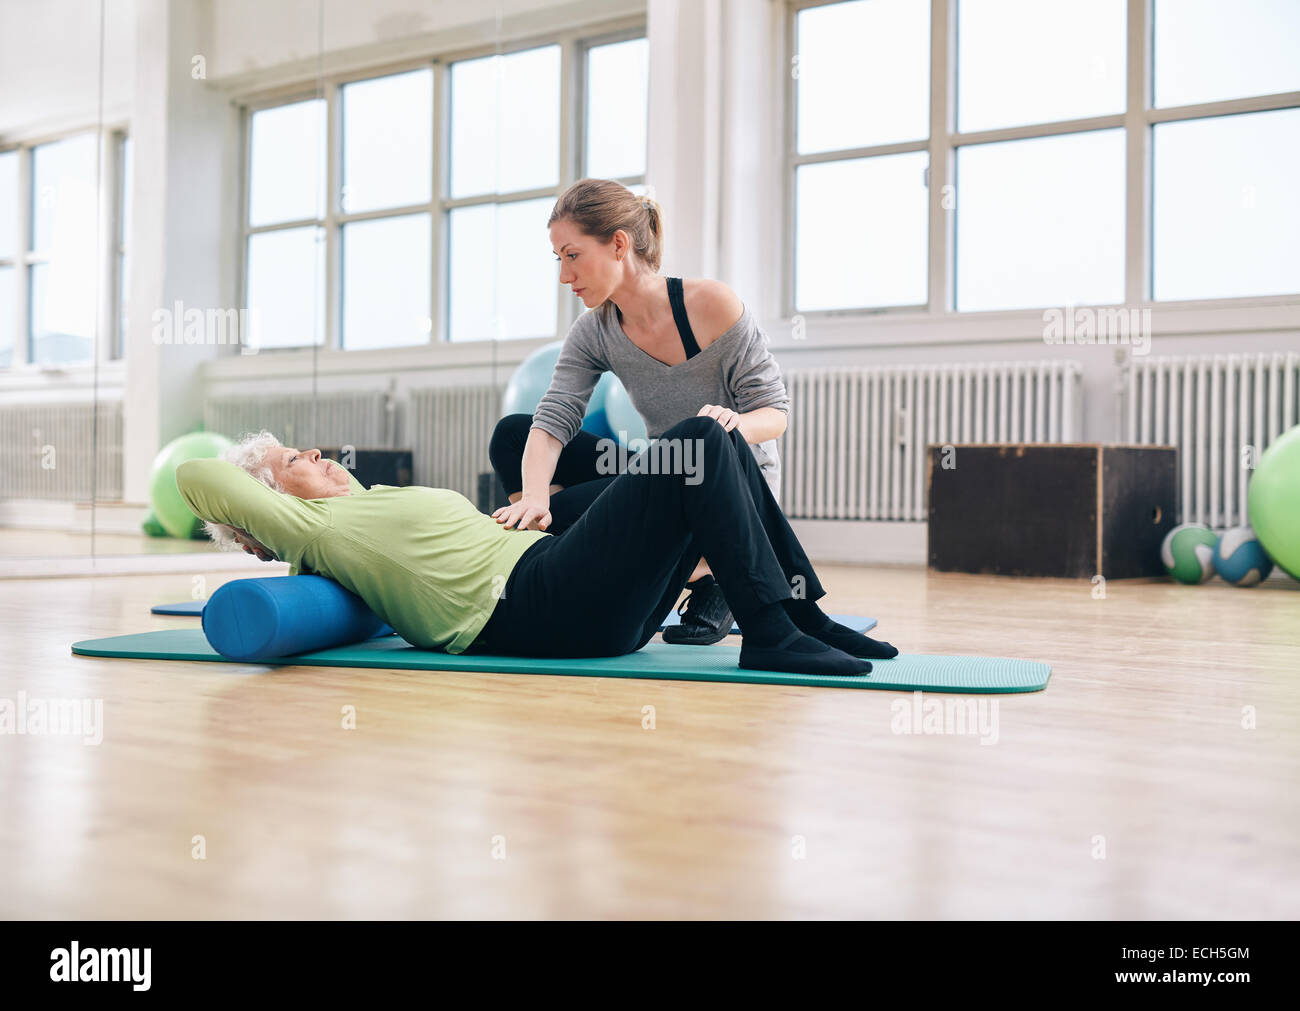 Senior woman performing back exercise on a foam roller being assisted by her personal trainer at gym. Physical therapist helping Stock Photo